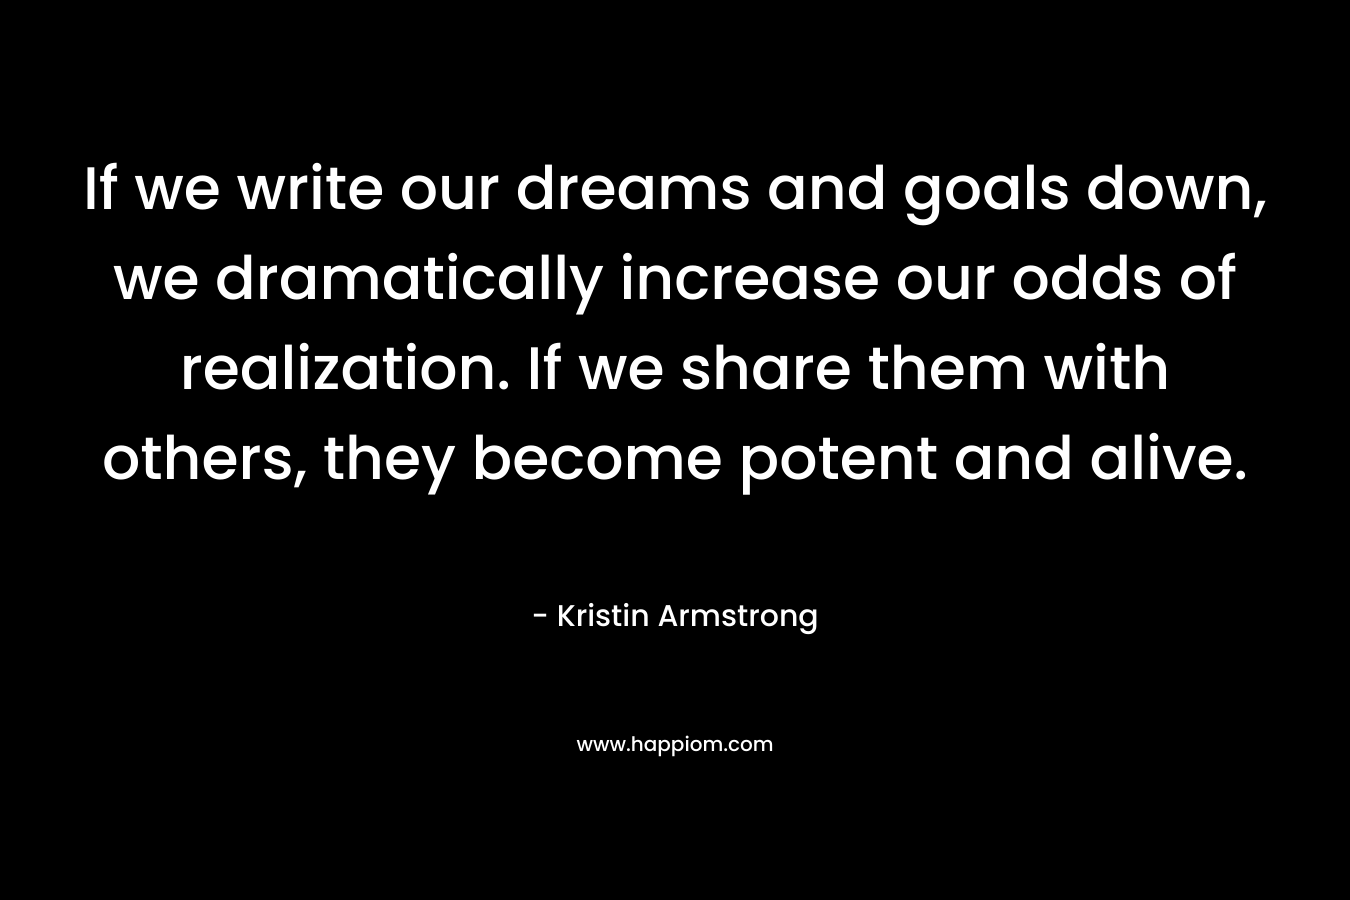 If we write our dreams and goals down, we dramatically increase our odds of realization. If we share them with others, they become potent and alive.